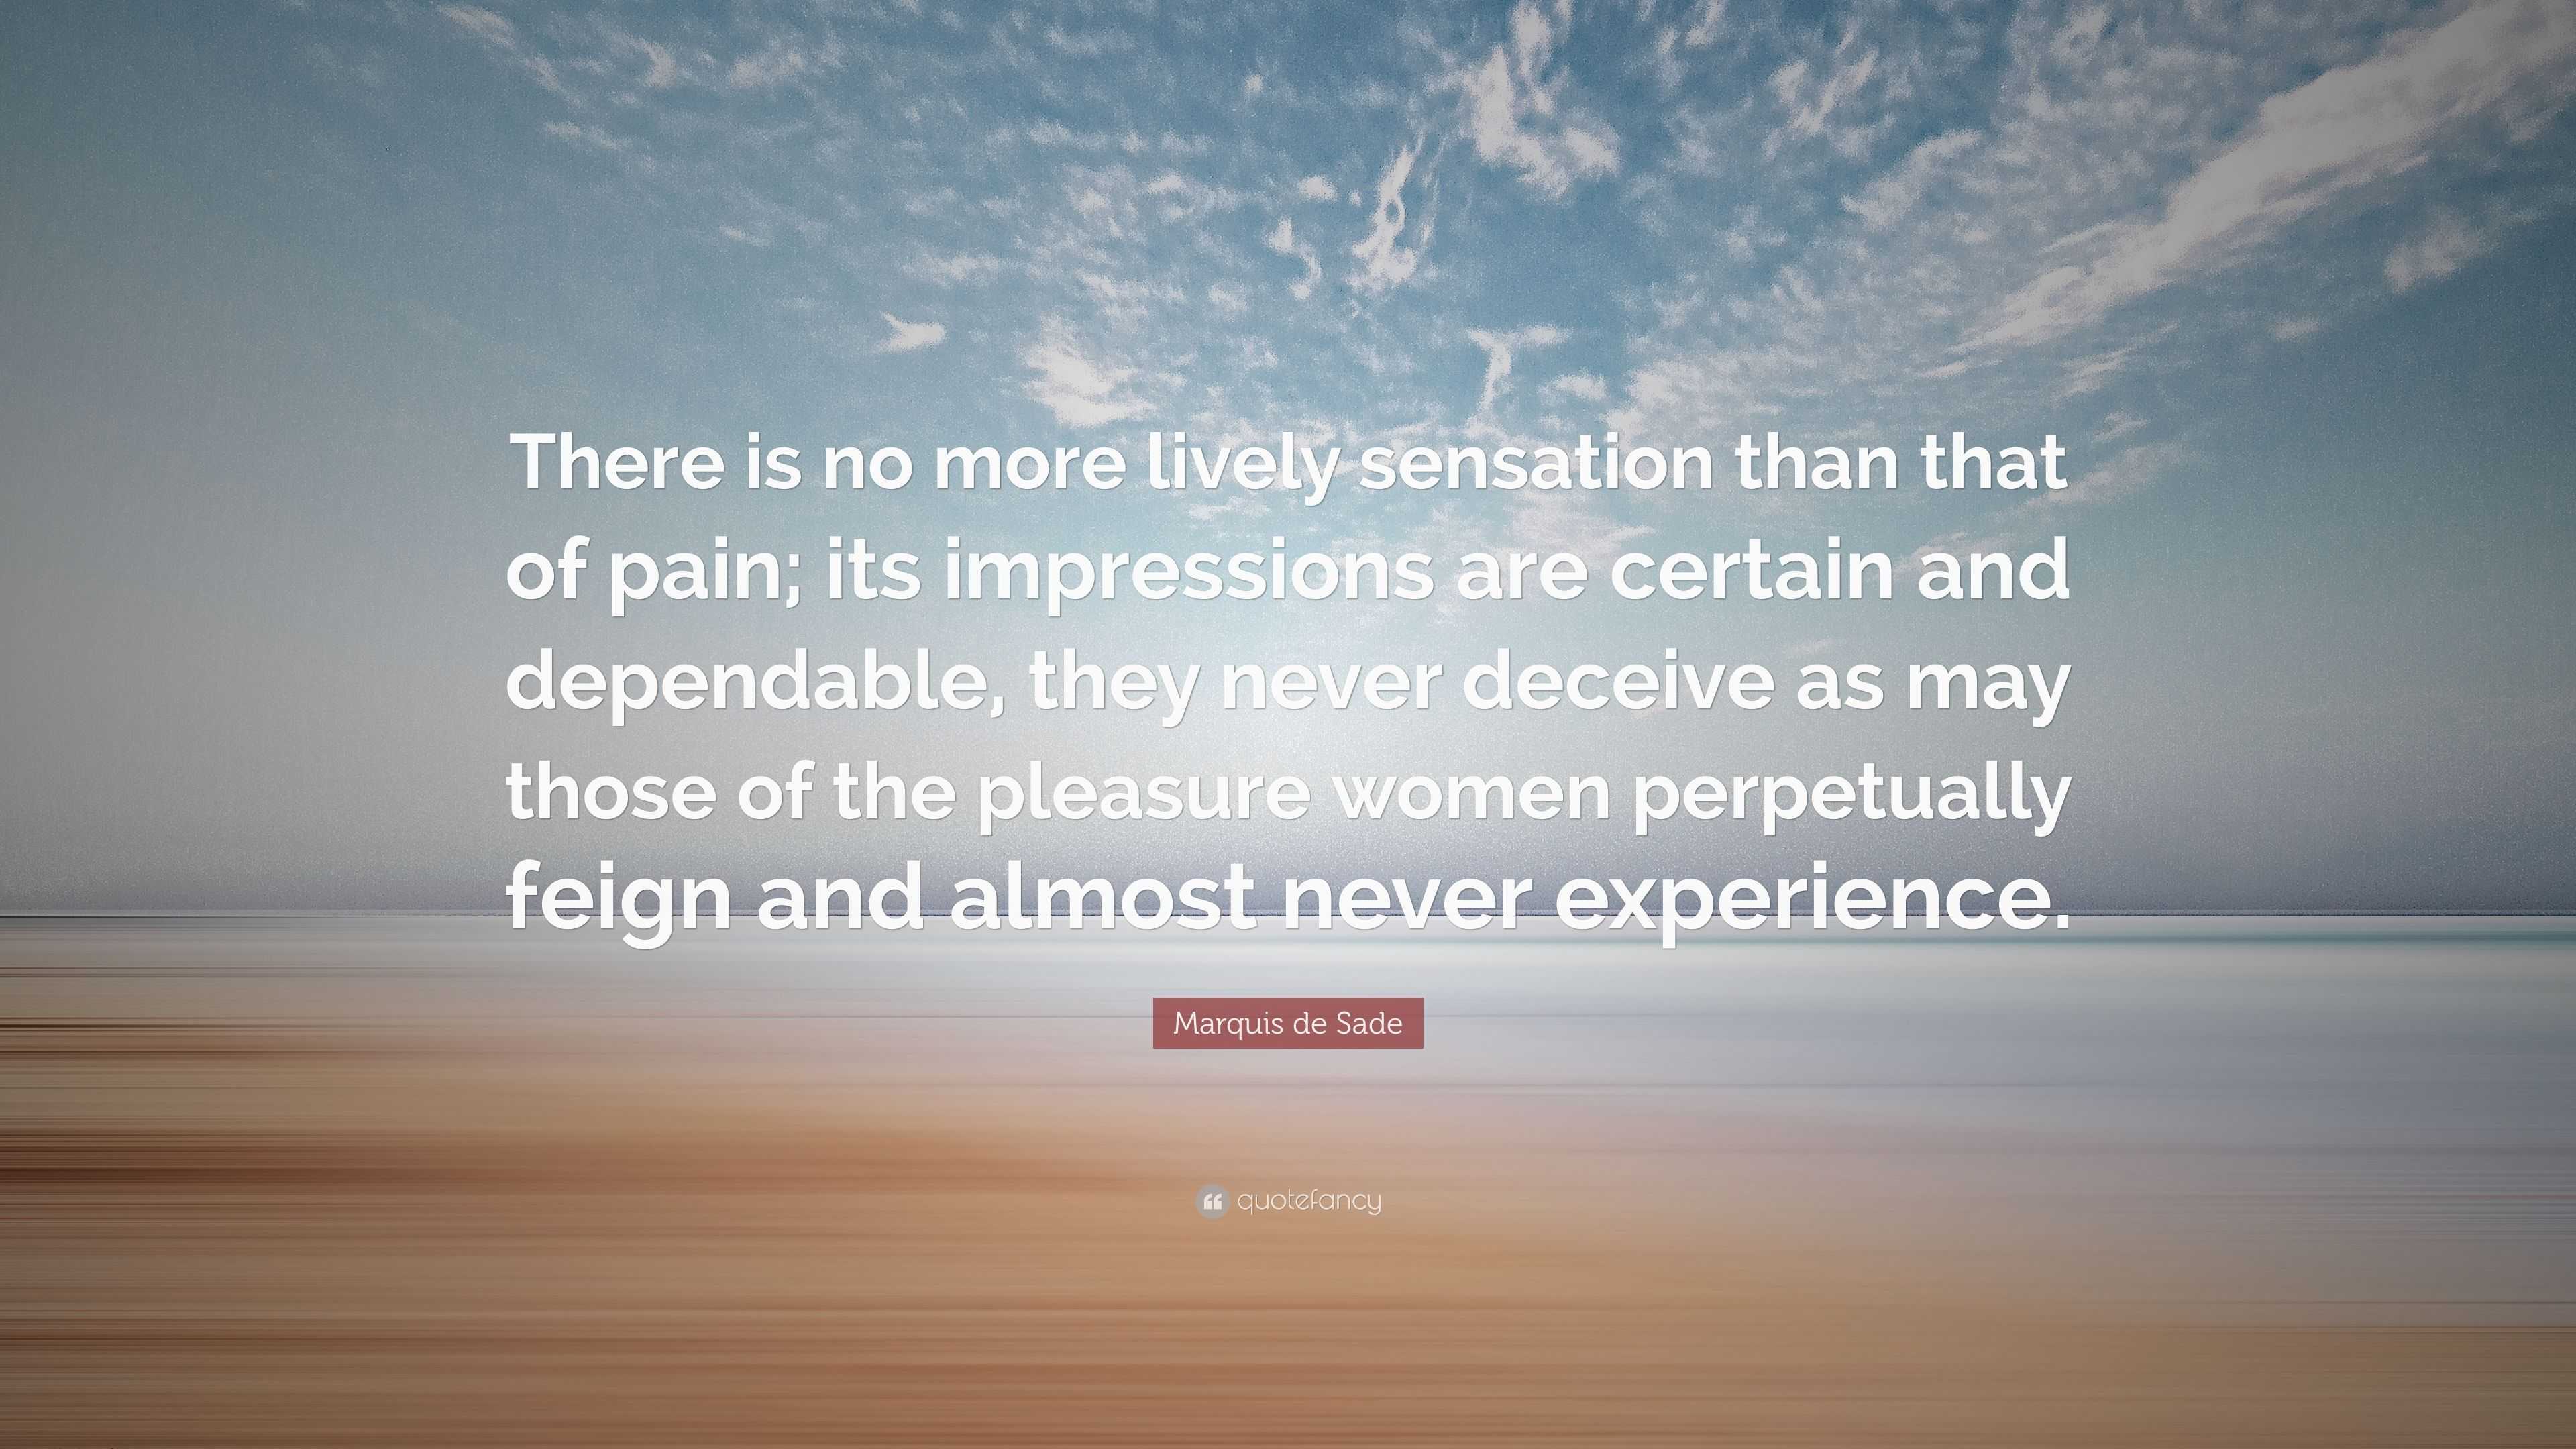 Marquis de Sade Quote: “There is no more lively sensation than that of ...